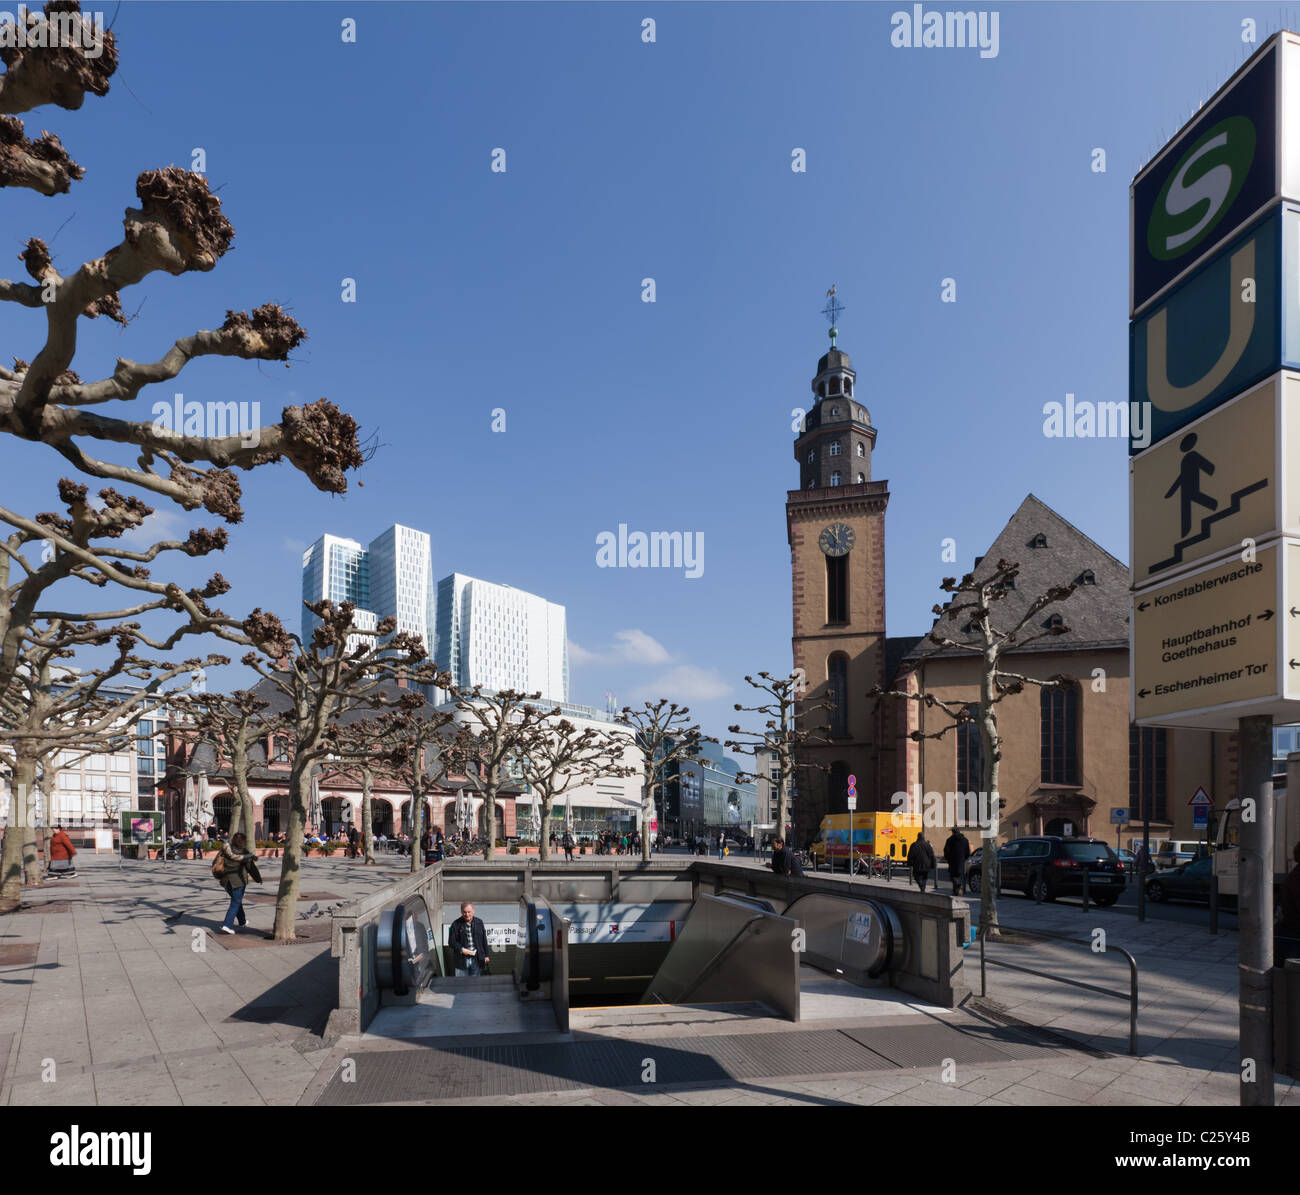 Hauptwache in Frankfurt with an S-bahn and U-bahn station entrance. This is the main retail area of Frankfurt Stock Photo